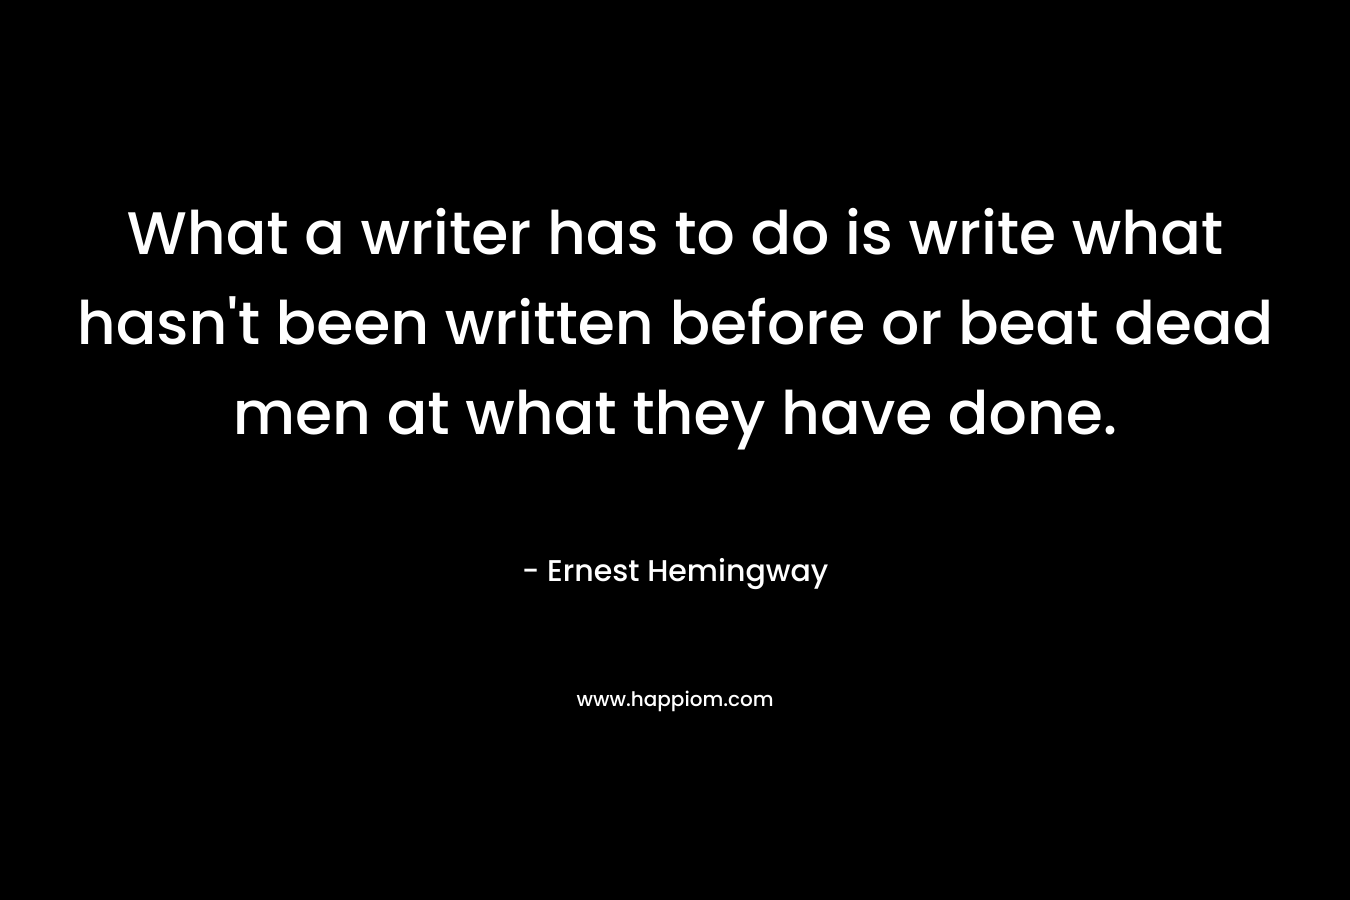 What a writer has to do is write what hasn’t been written before or beat dead men at what they have done. – Ernest Hemingway